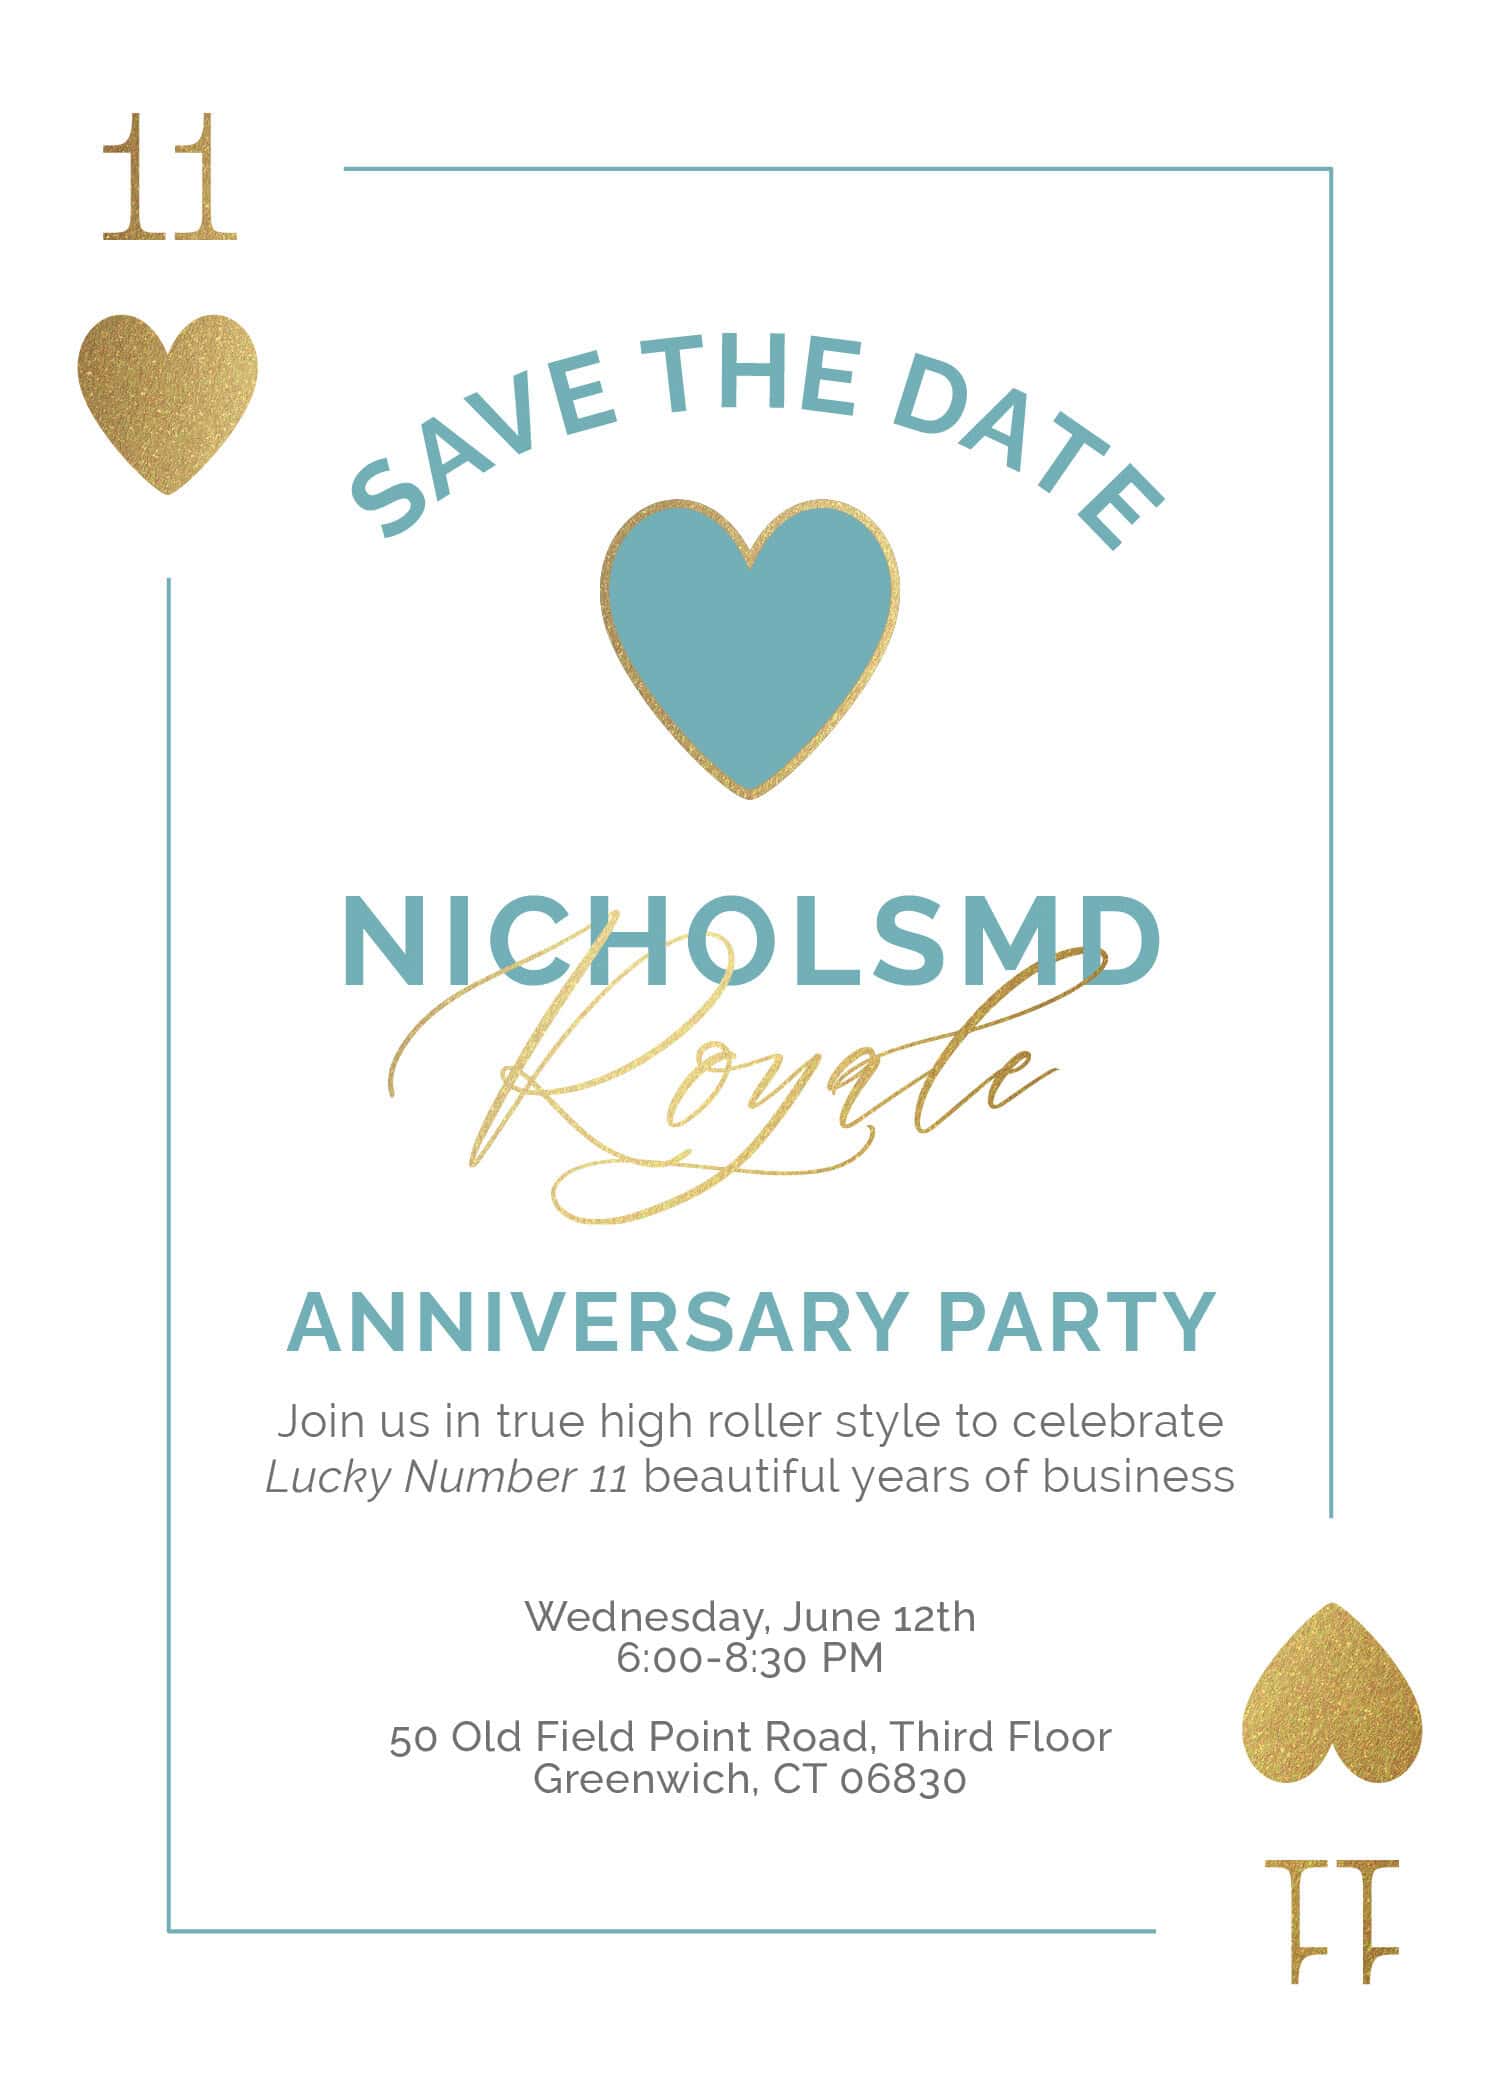 Save the Date: Nichols MD Royale